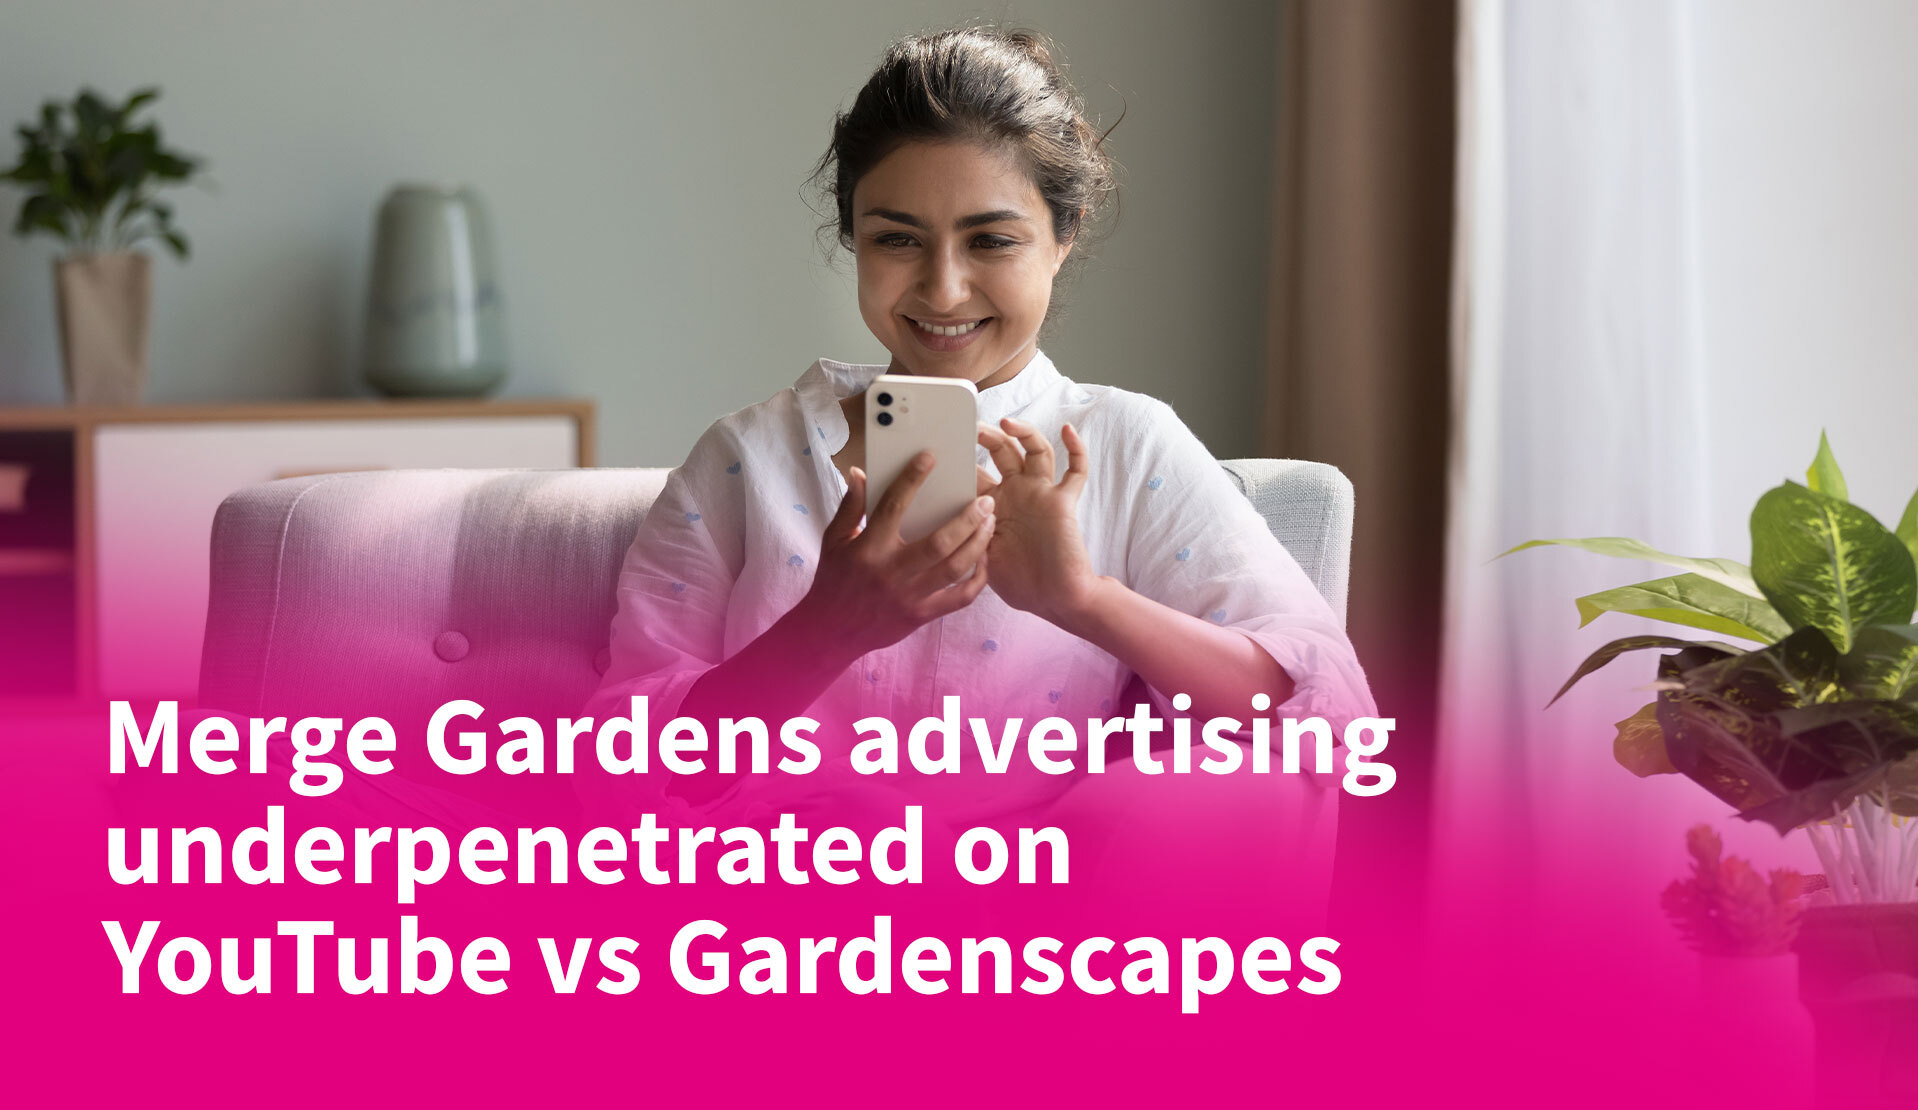 Merge Gardens Advertising Underpenetrated on YouTube vs Gardenscapes